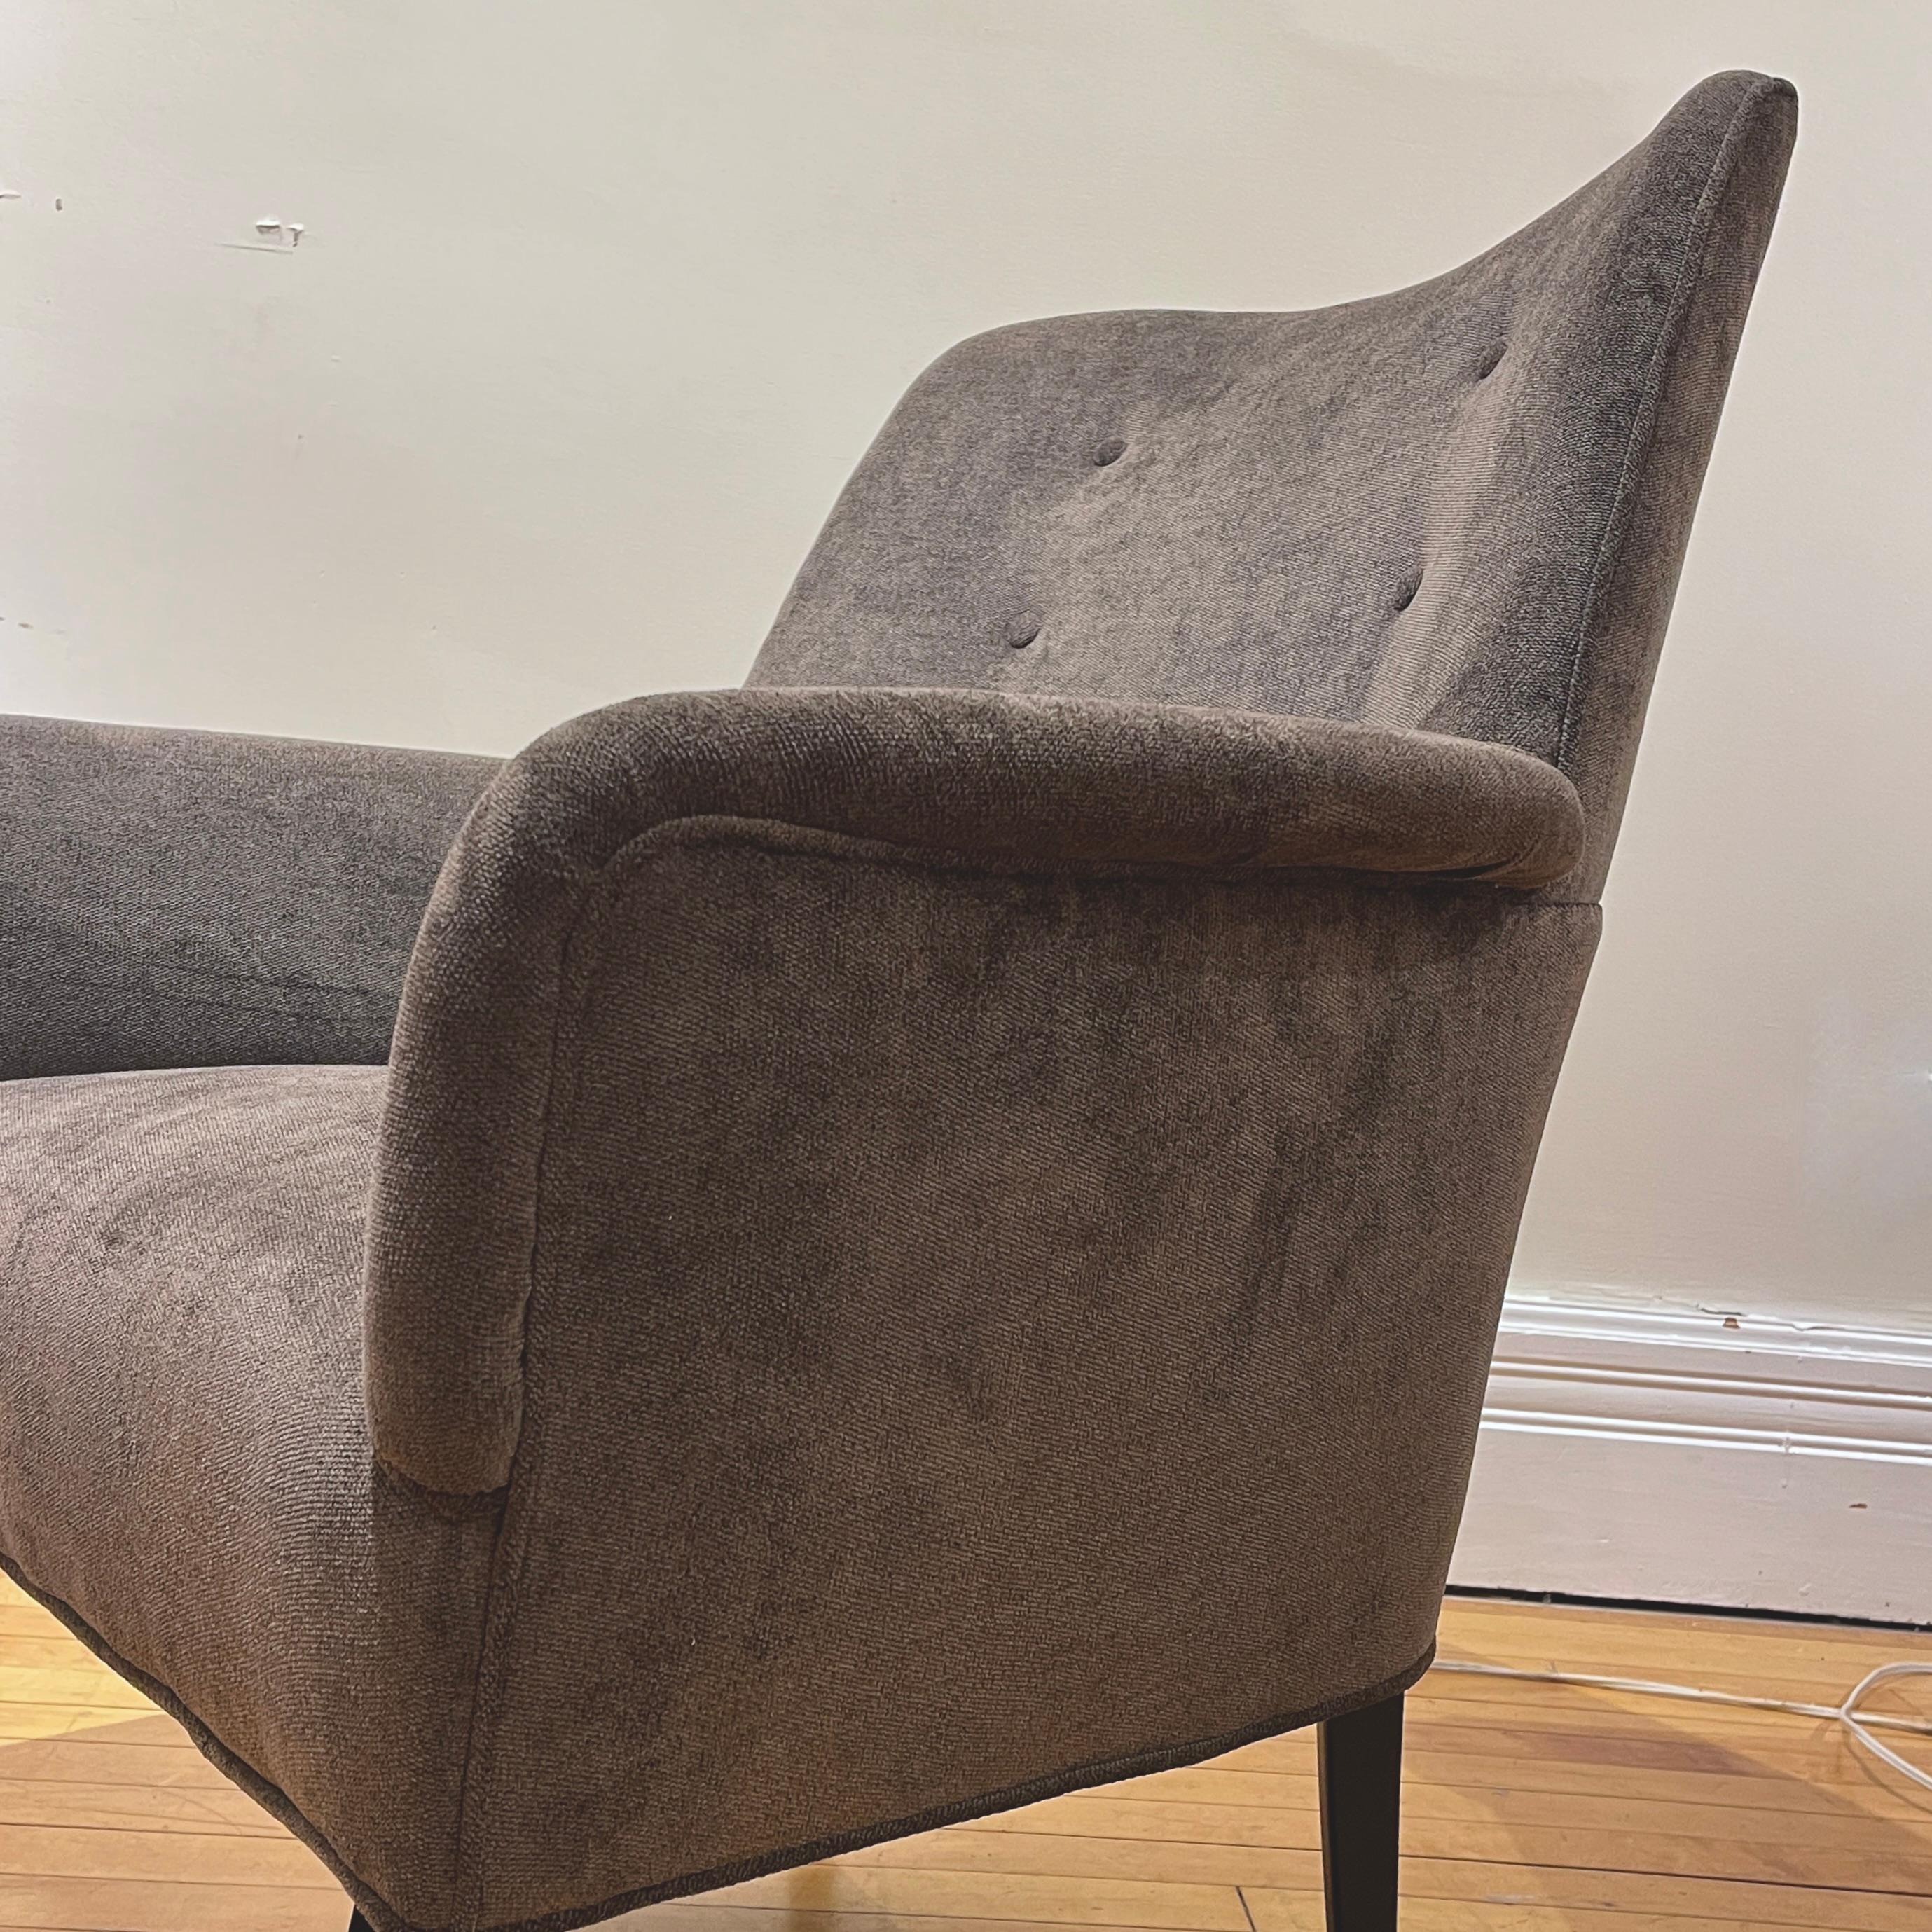 Stunning pair of Italian lounge chairs from the 1960s. Reupholstered in a deep grey velvet type upholstery. 
Absolutely stunning sculptural midcentury modern lounge chairs.